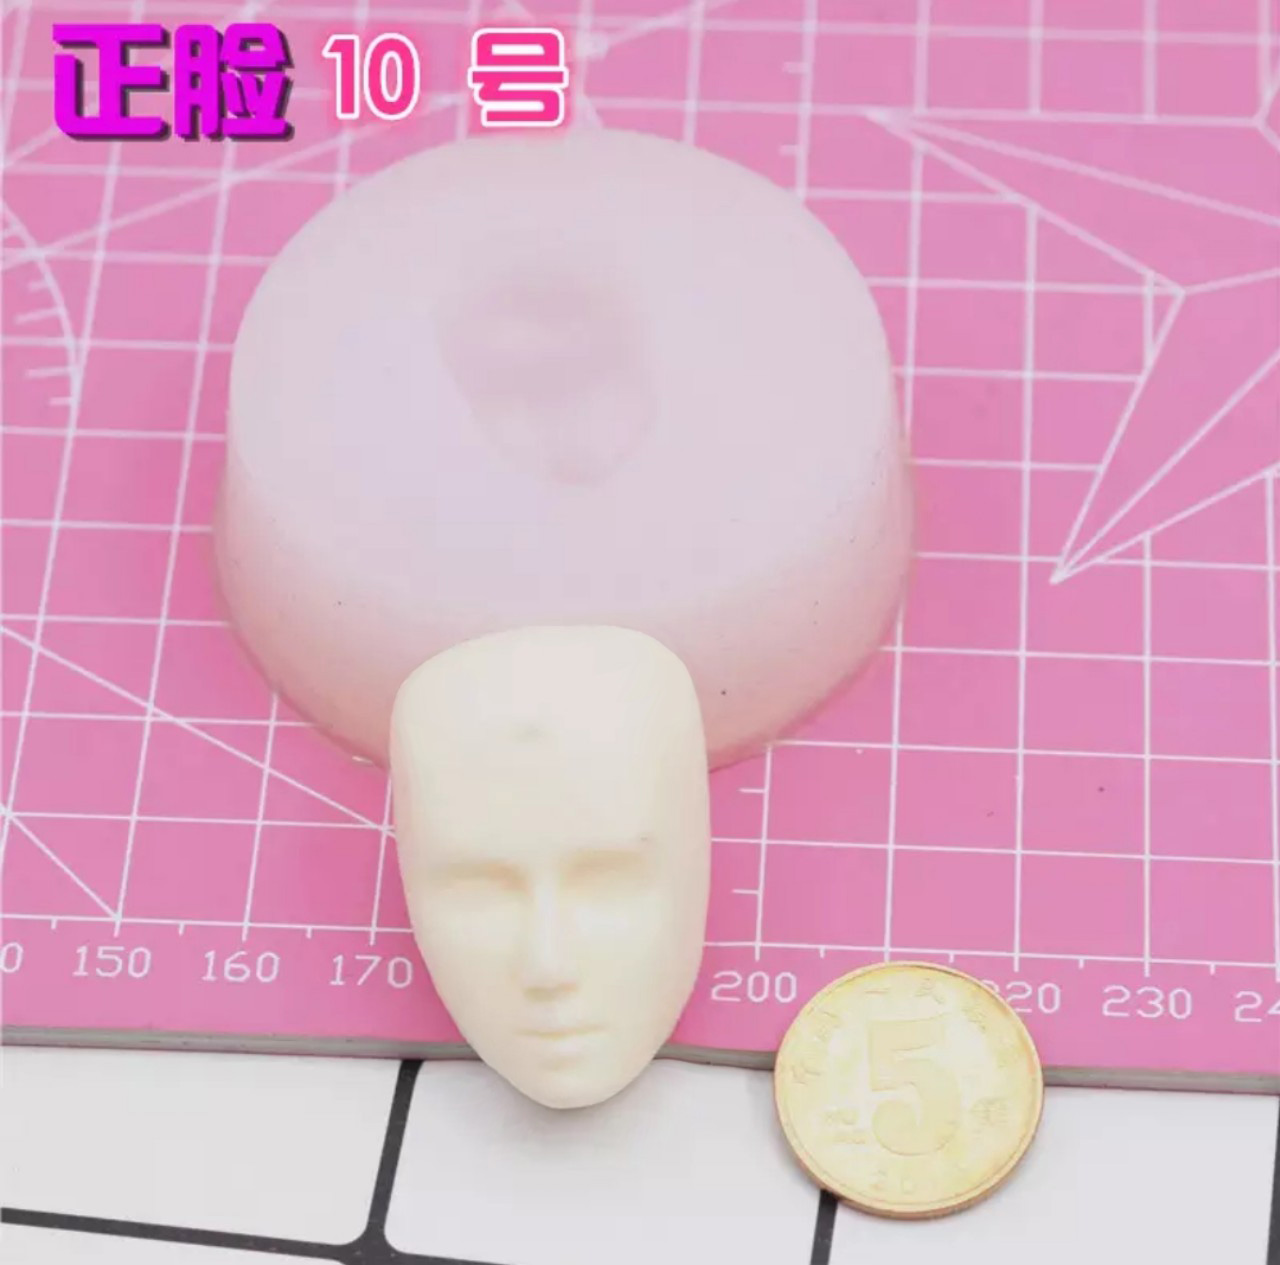 Doll Chibi Figure Statue Face 3d Clear Silicone Mold Fondant Sugarcraft Cake Decorating Tools Polymer Clay Handmade Craft